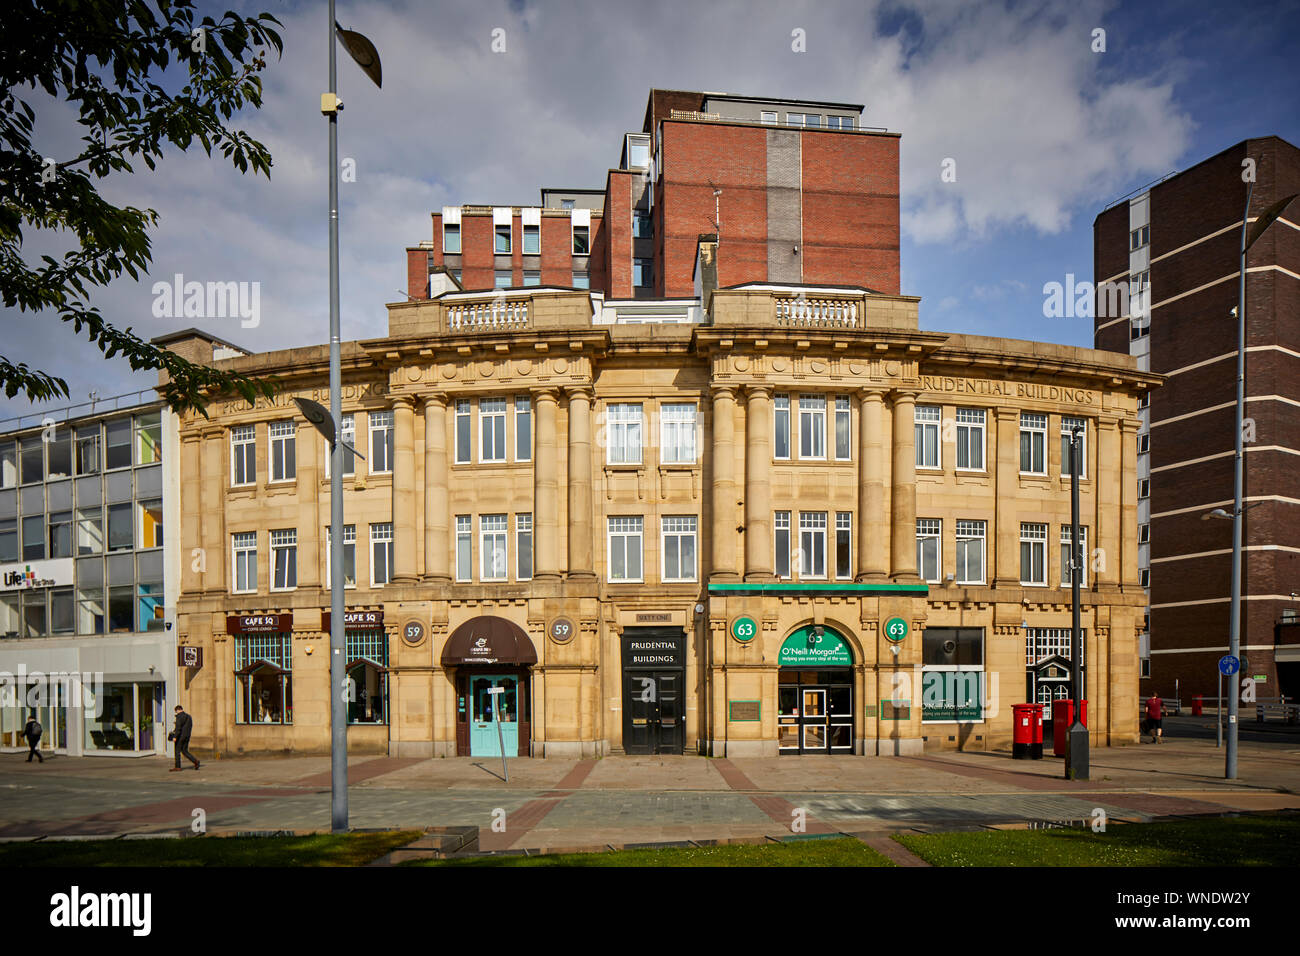 Stockport town centres ST PETERSGATE former Prudential Buildings Stock Photo